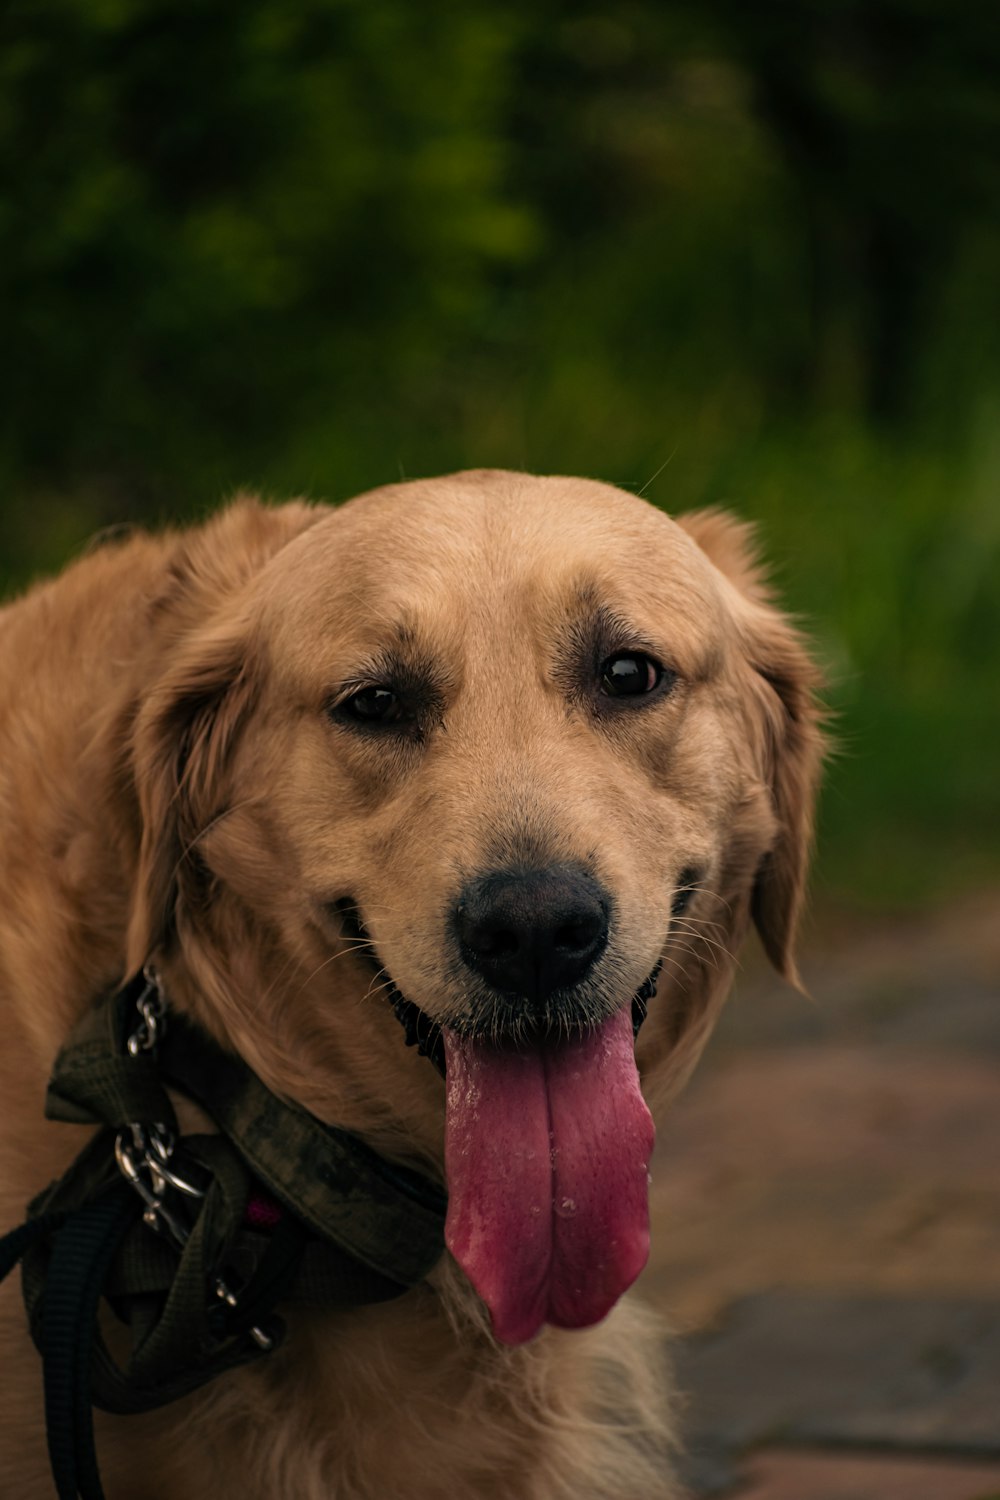 a close up of a dog with its tongue hanging out